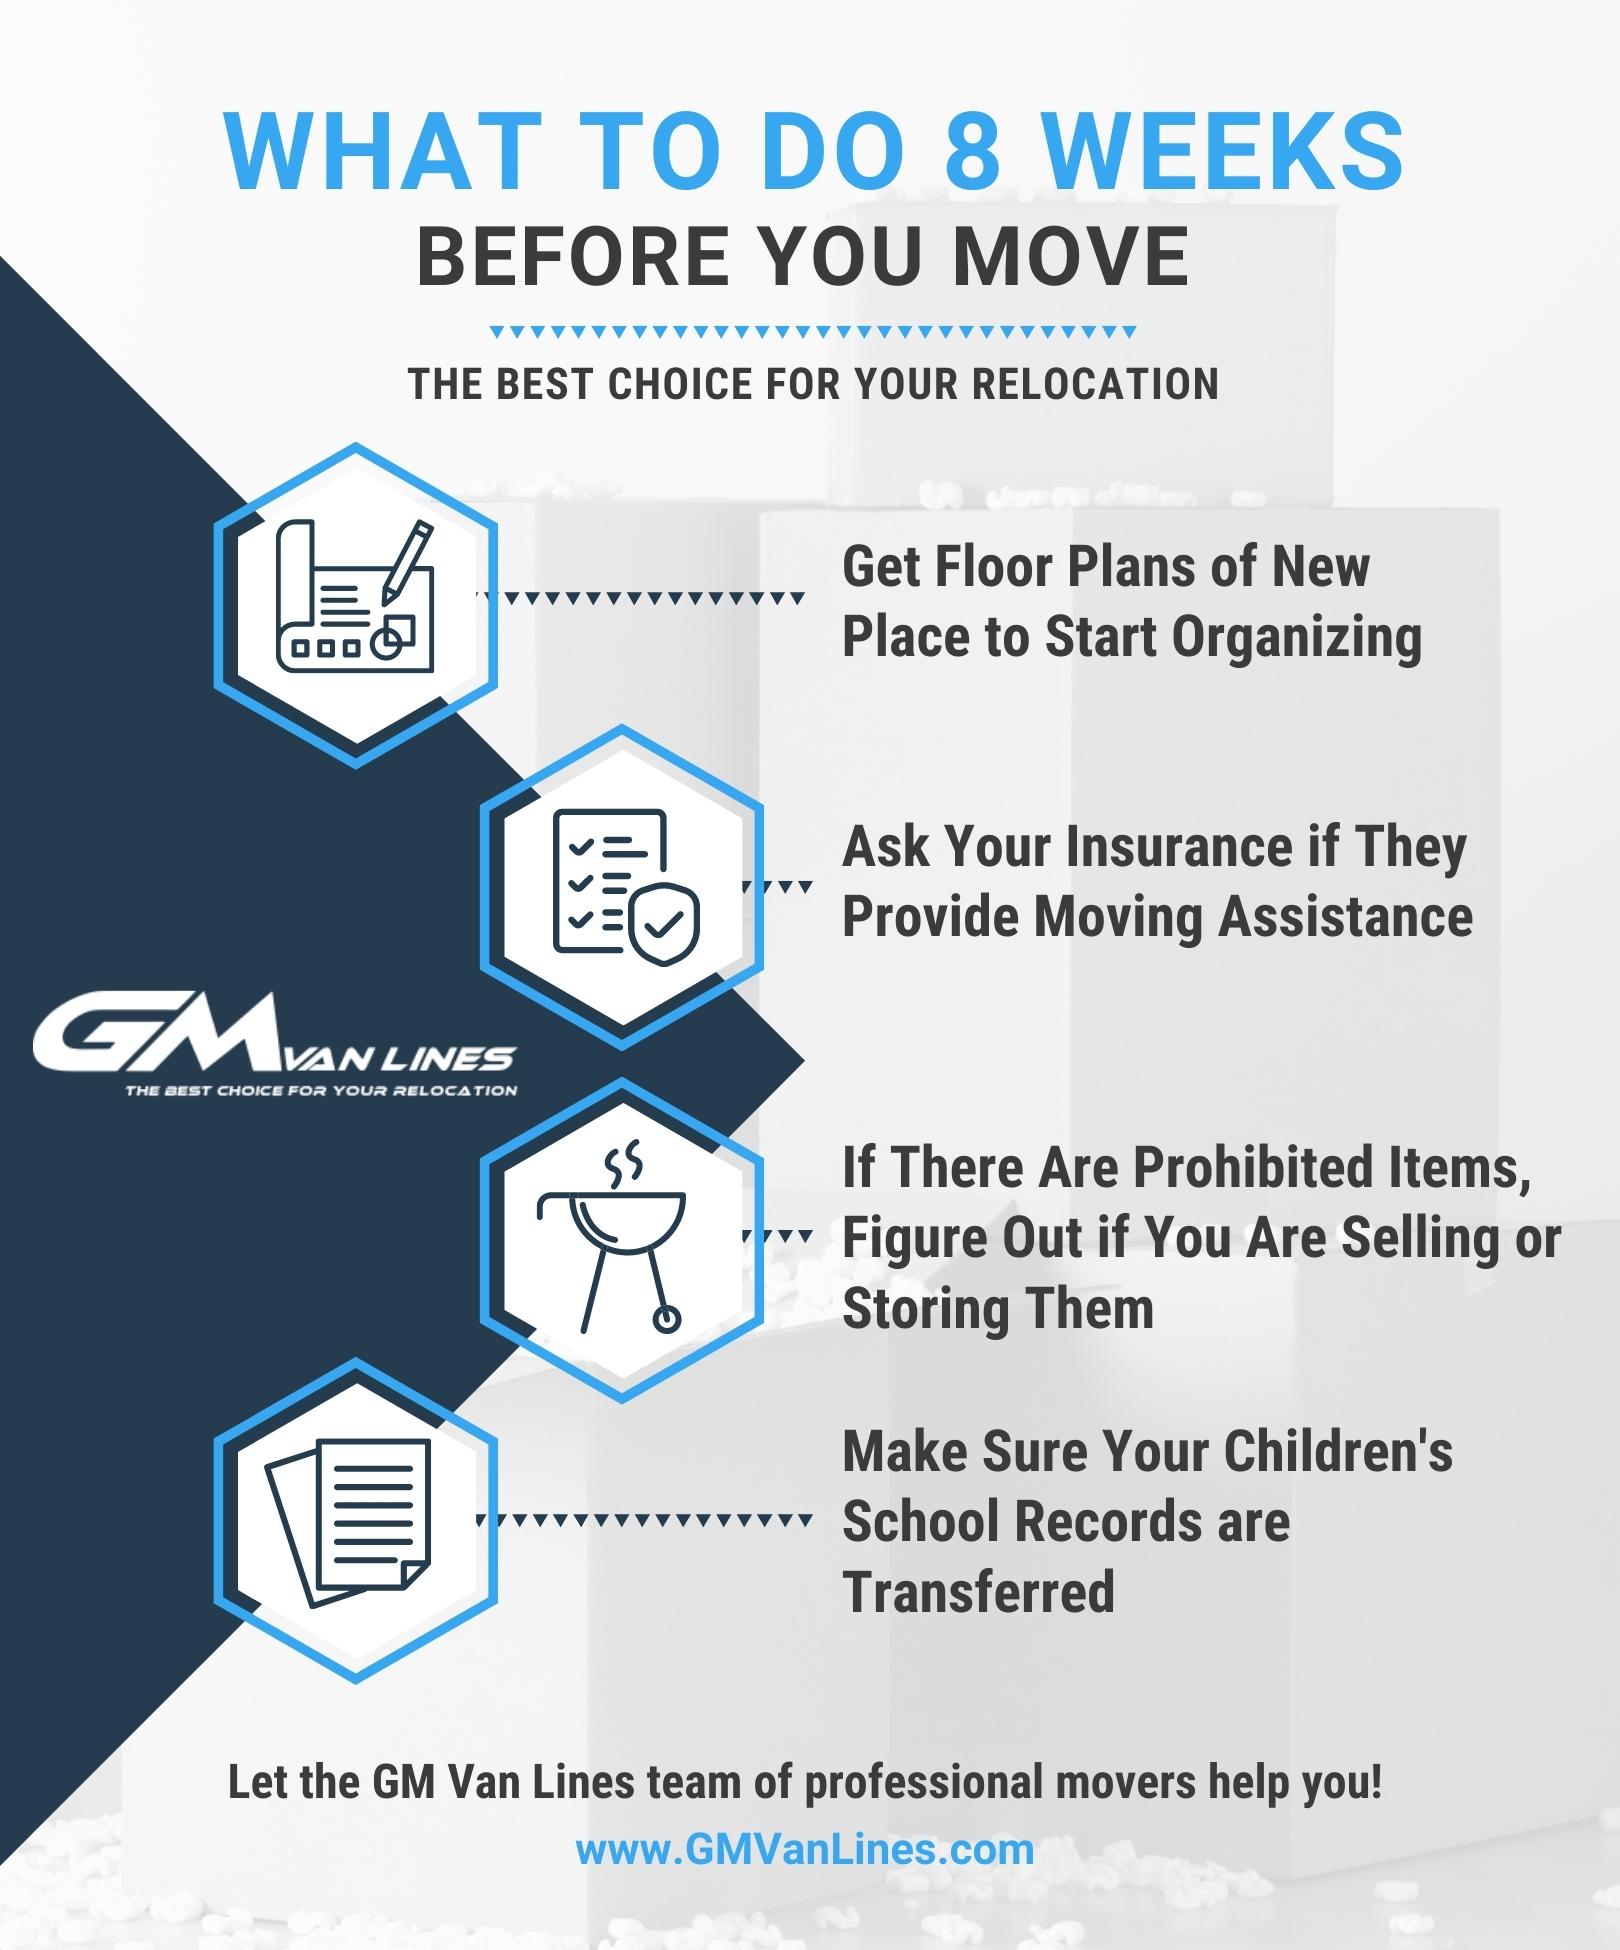 What To Do 8 Weeks Before You Move - Infographic